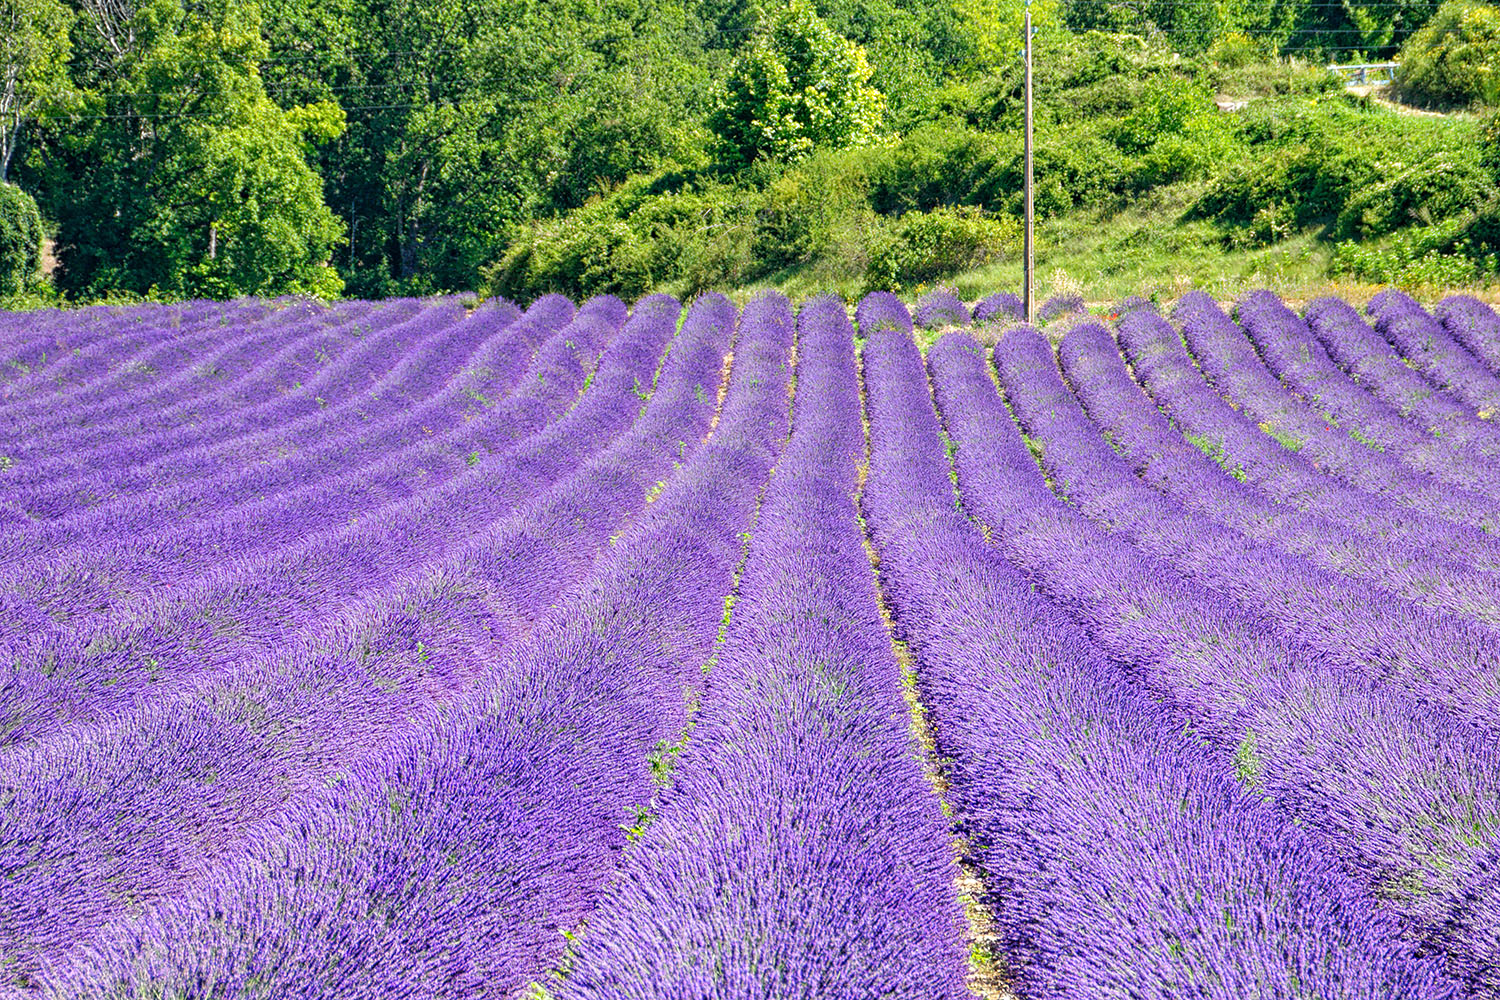 Depending on how the light strikes it, the color of the lavender can become quite intense.